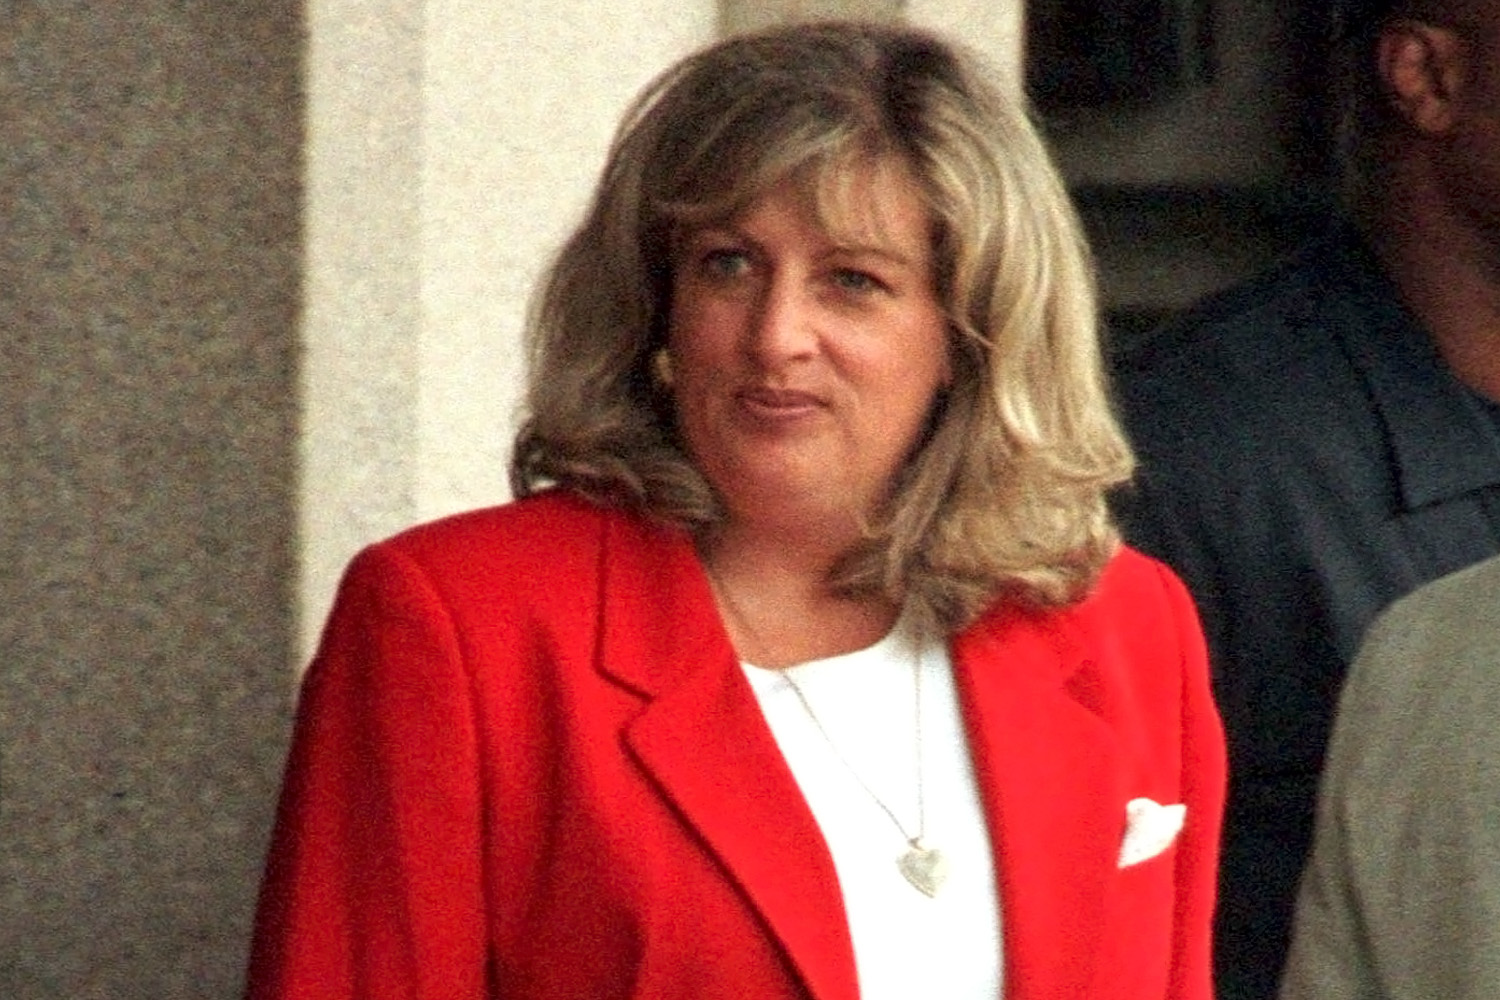 Who was Linda Tripp and how did she die? The US Sun